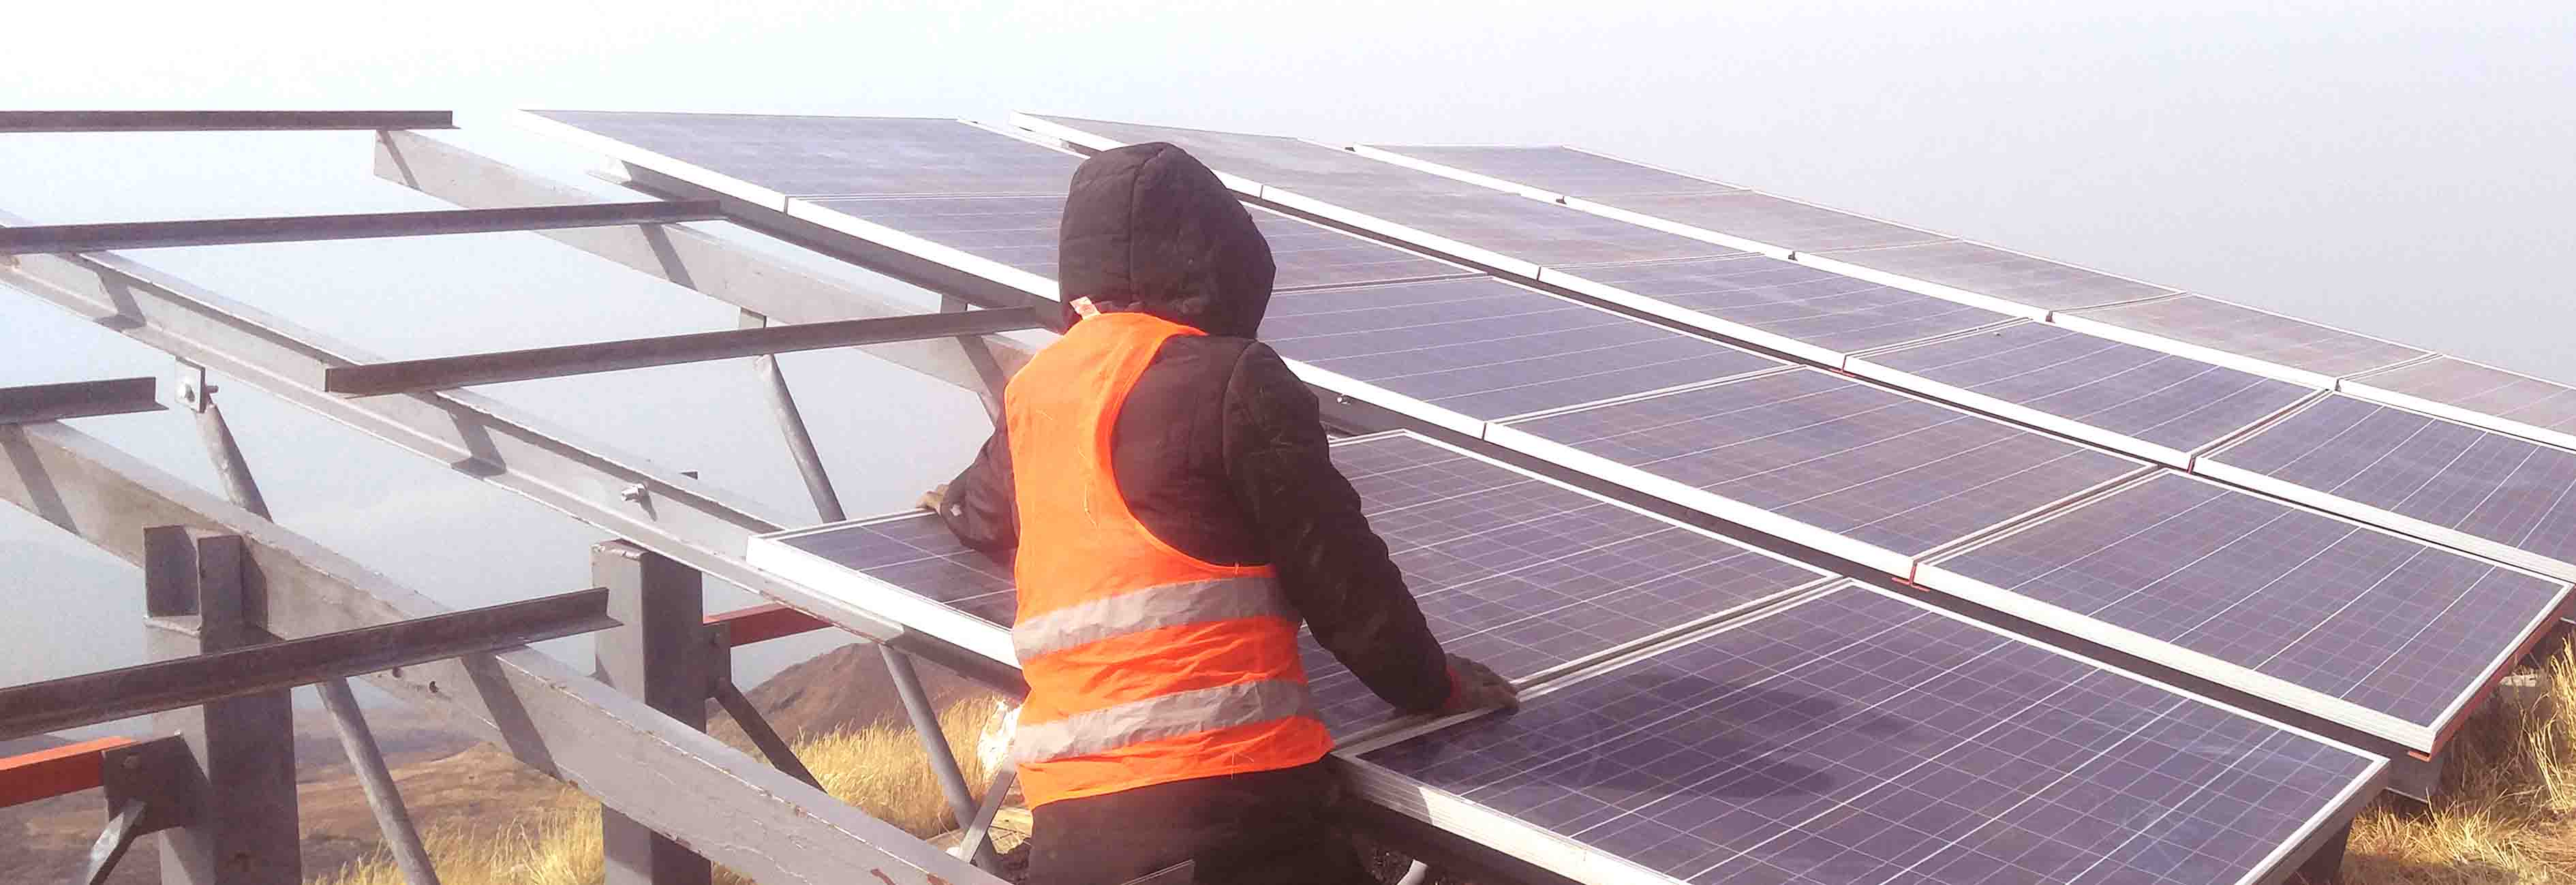 Afose Works Complete Solar Power Plantt Perenco Cameroon 3